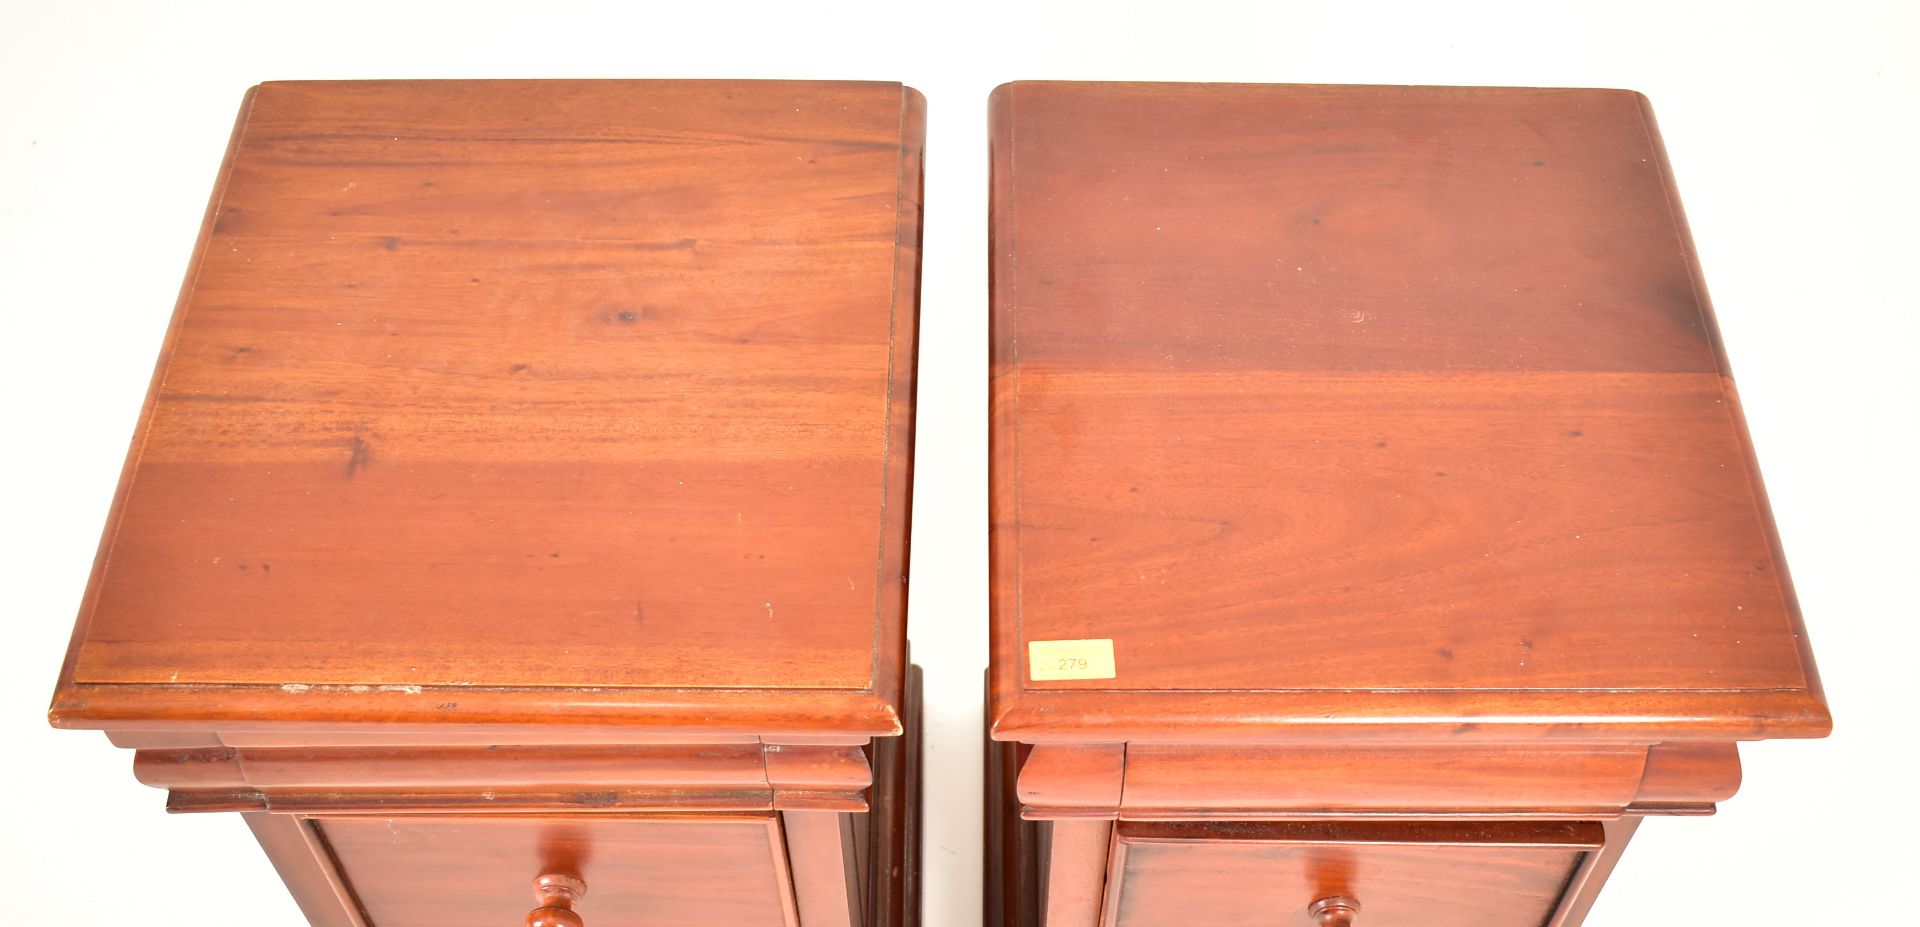 PAIR OF VINTAGE MAHOGANY BEDSIDE CHEST BY ANCIENT MARINERS - Image 2 of 5